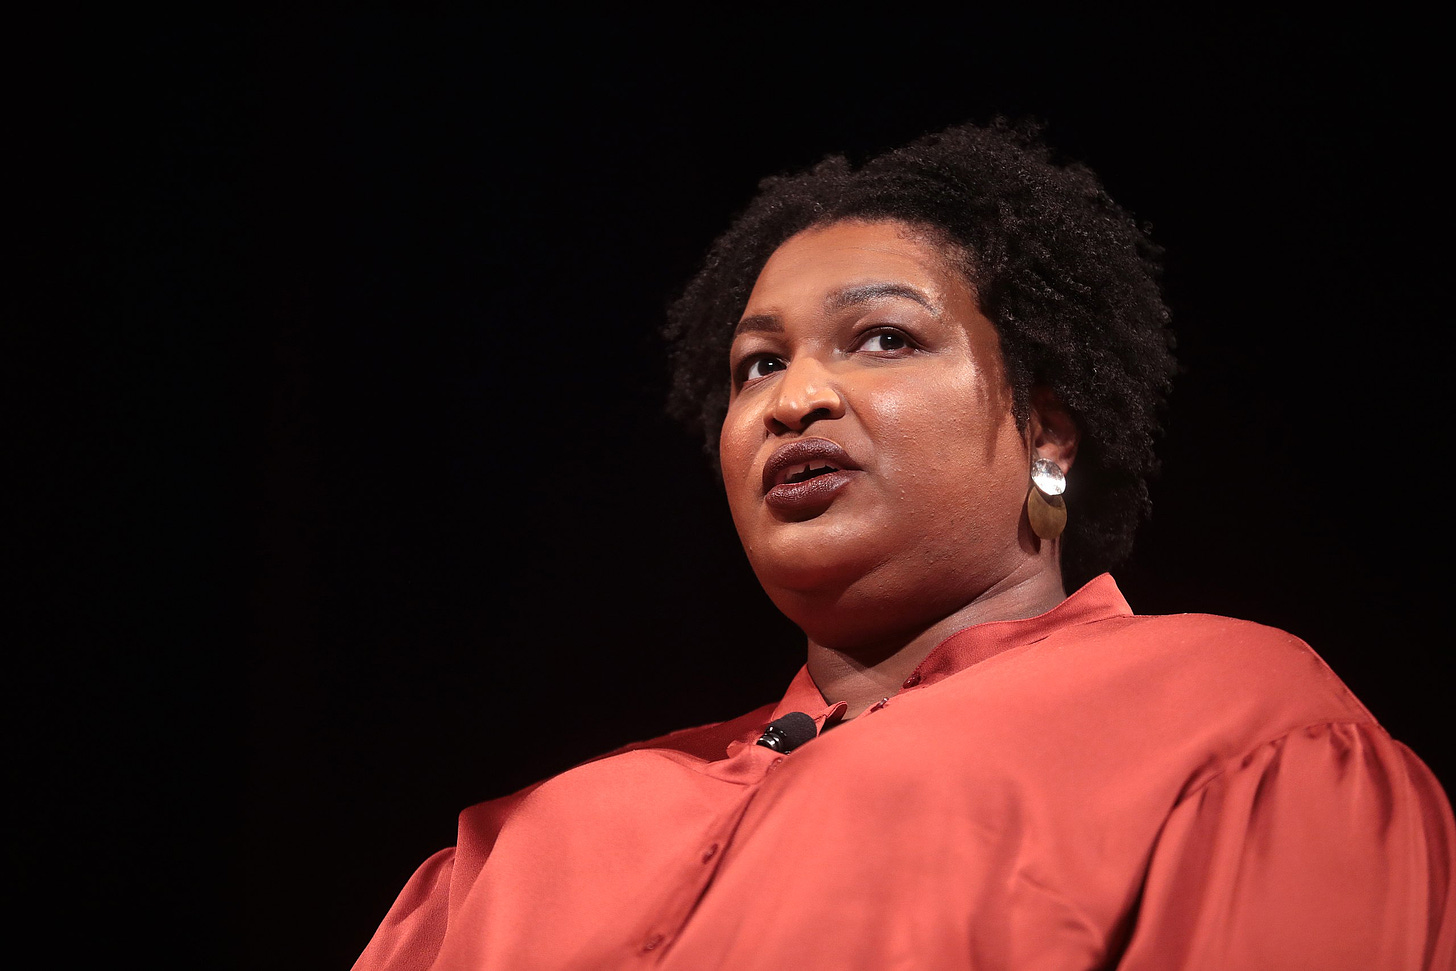 Stacy Abrams at an event in Mesa, Arizona in 2021. Photo by Gage Skidmore